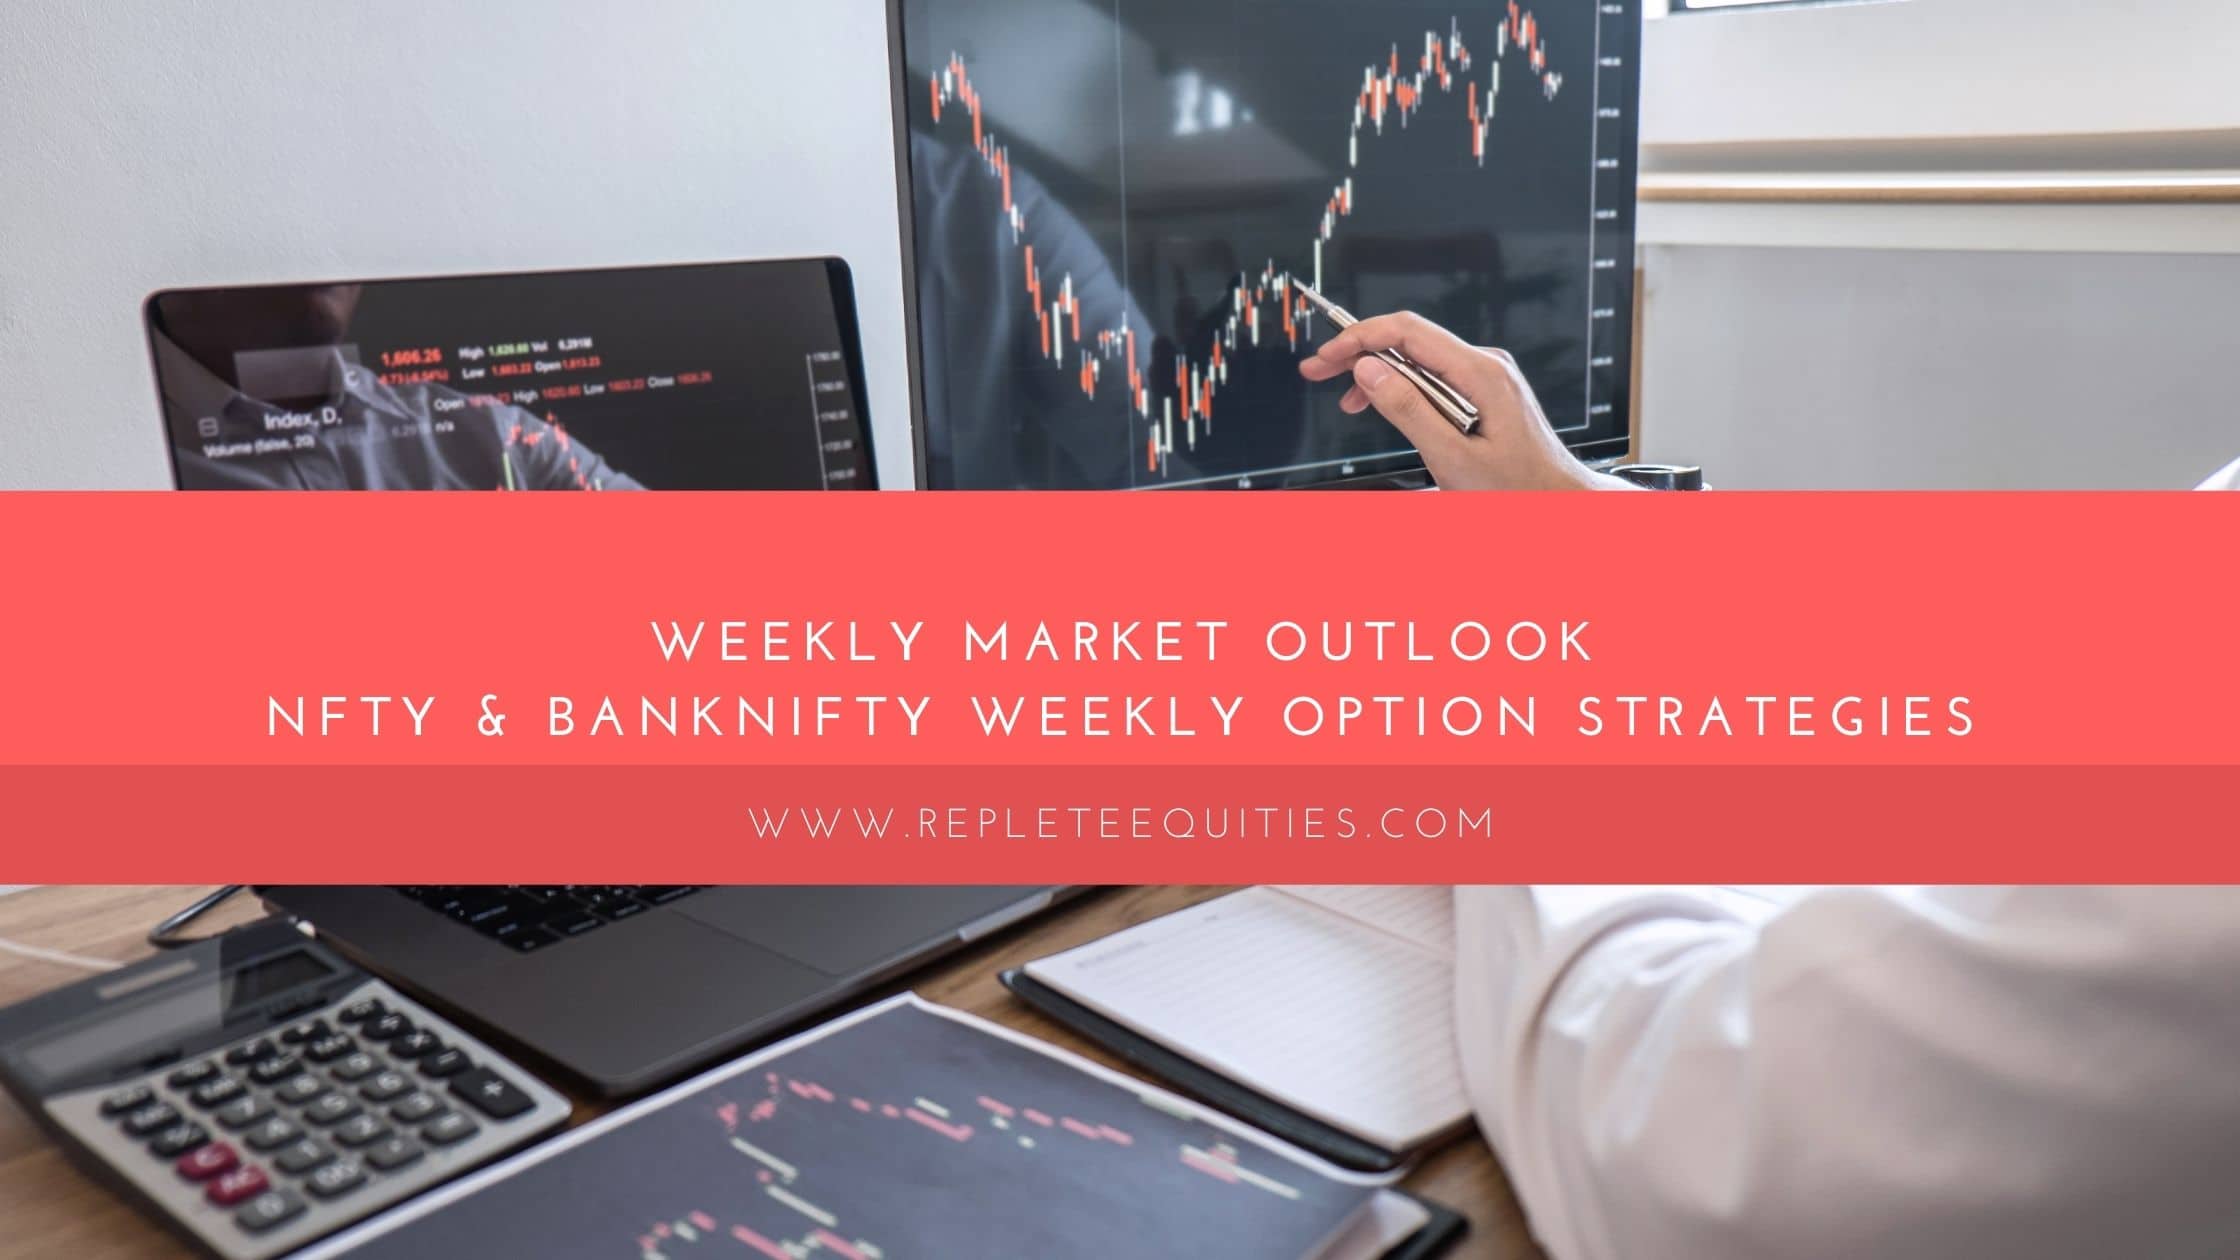 Nifty & Bank nifty Weekly analysis with best Option strategies for Weekly Expiry